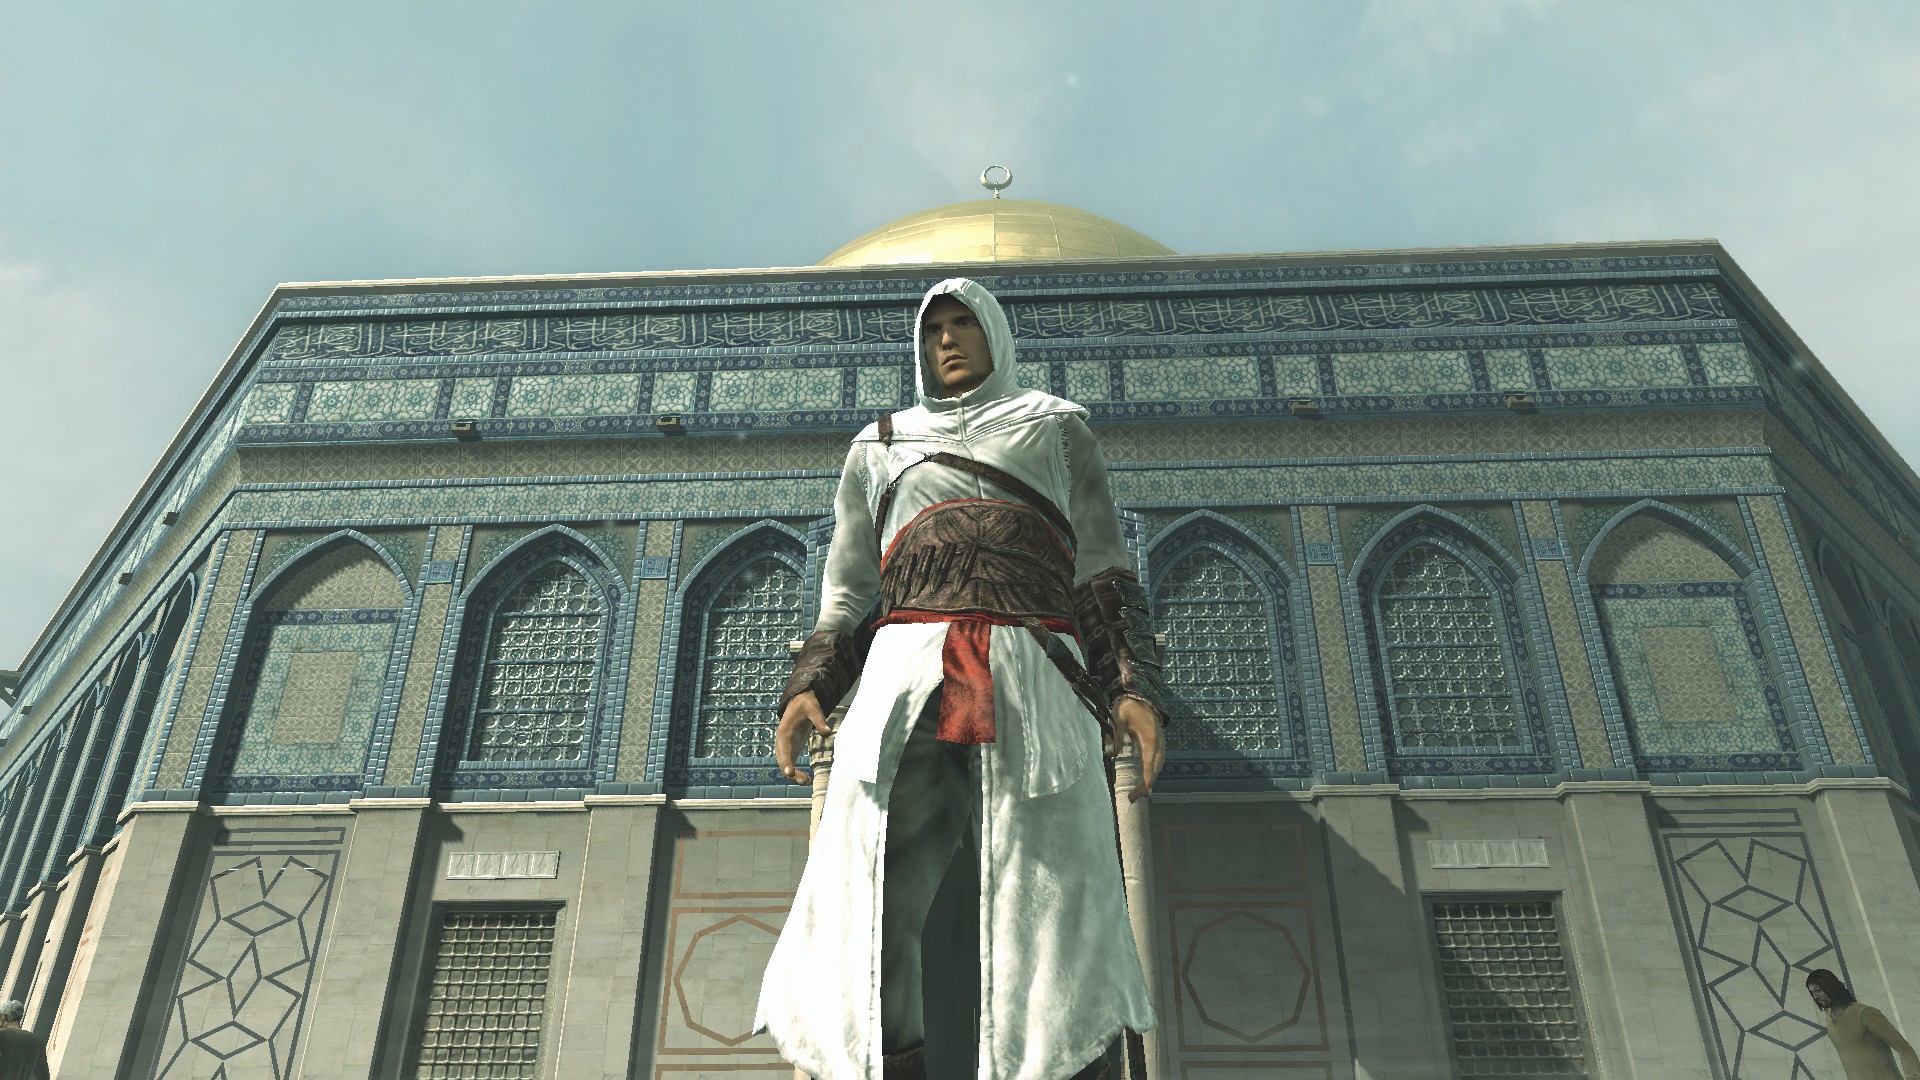 Video Game Assassin 039 S Creed 1920x1080